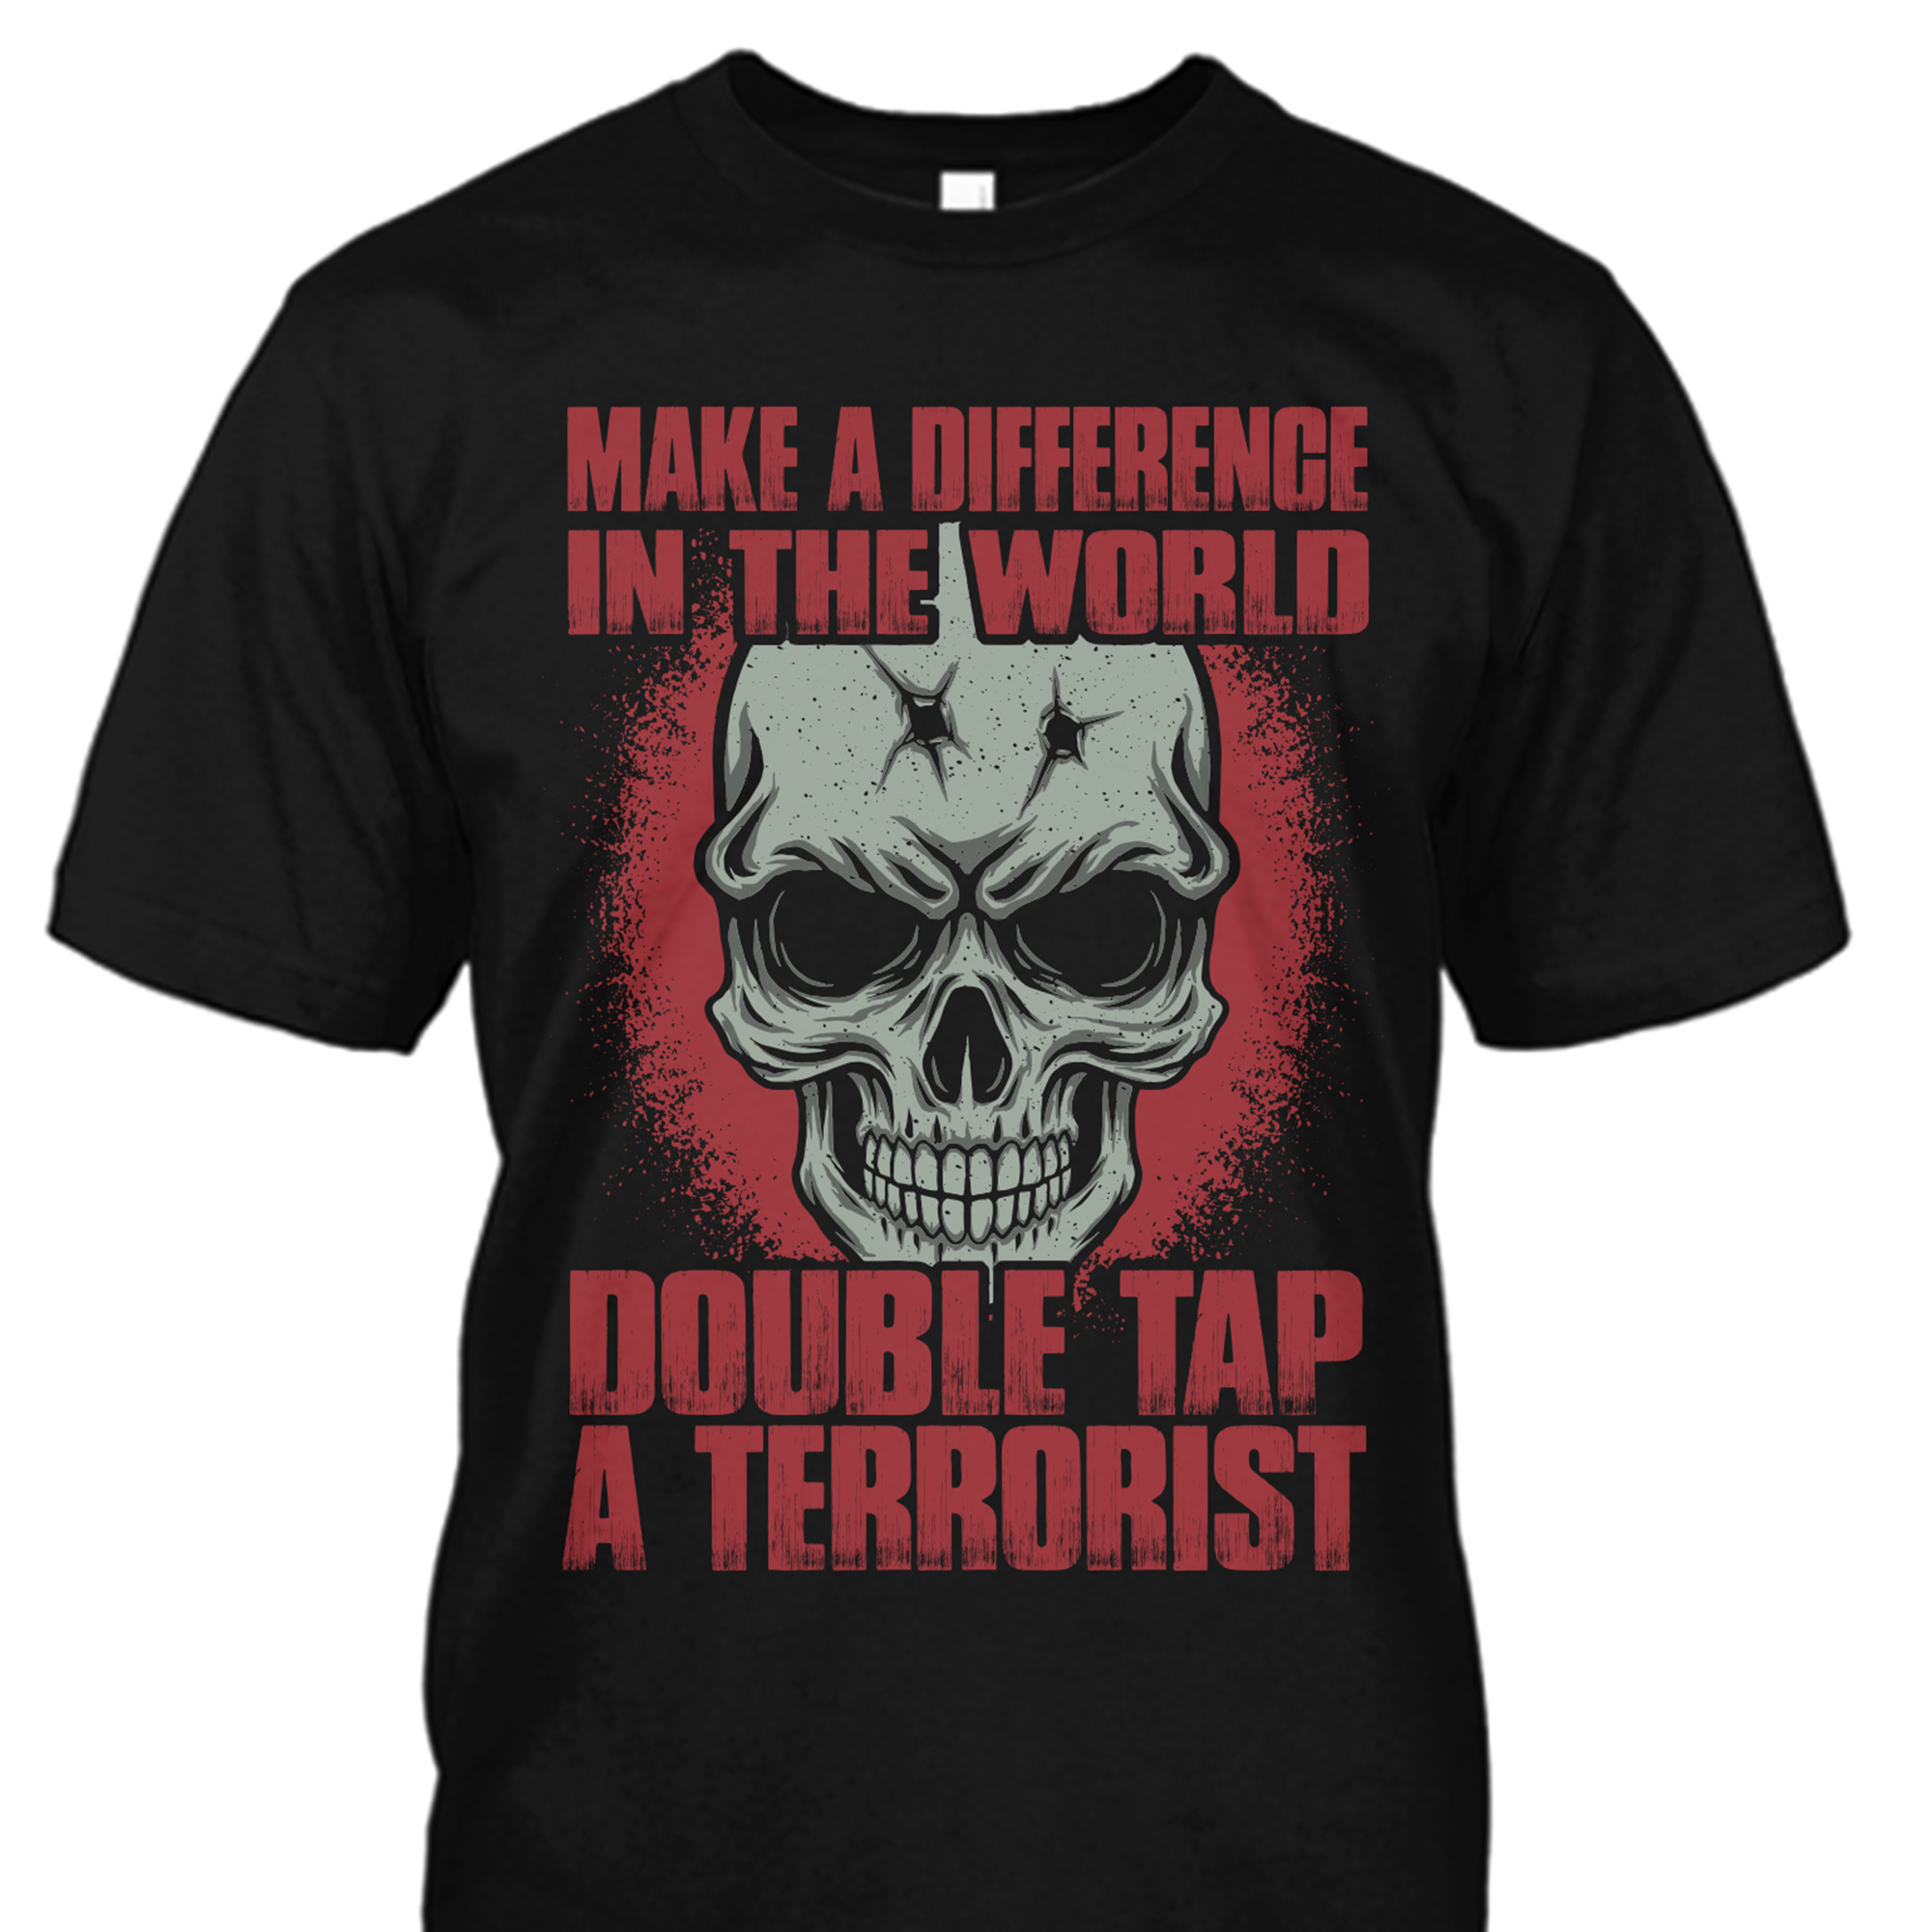 Make A Difference In The World Double Tap a Terrorist